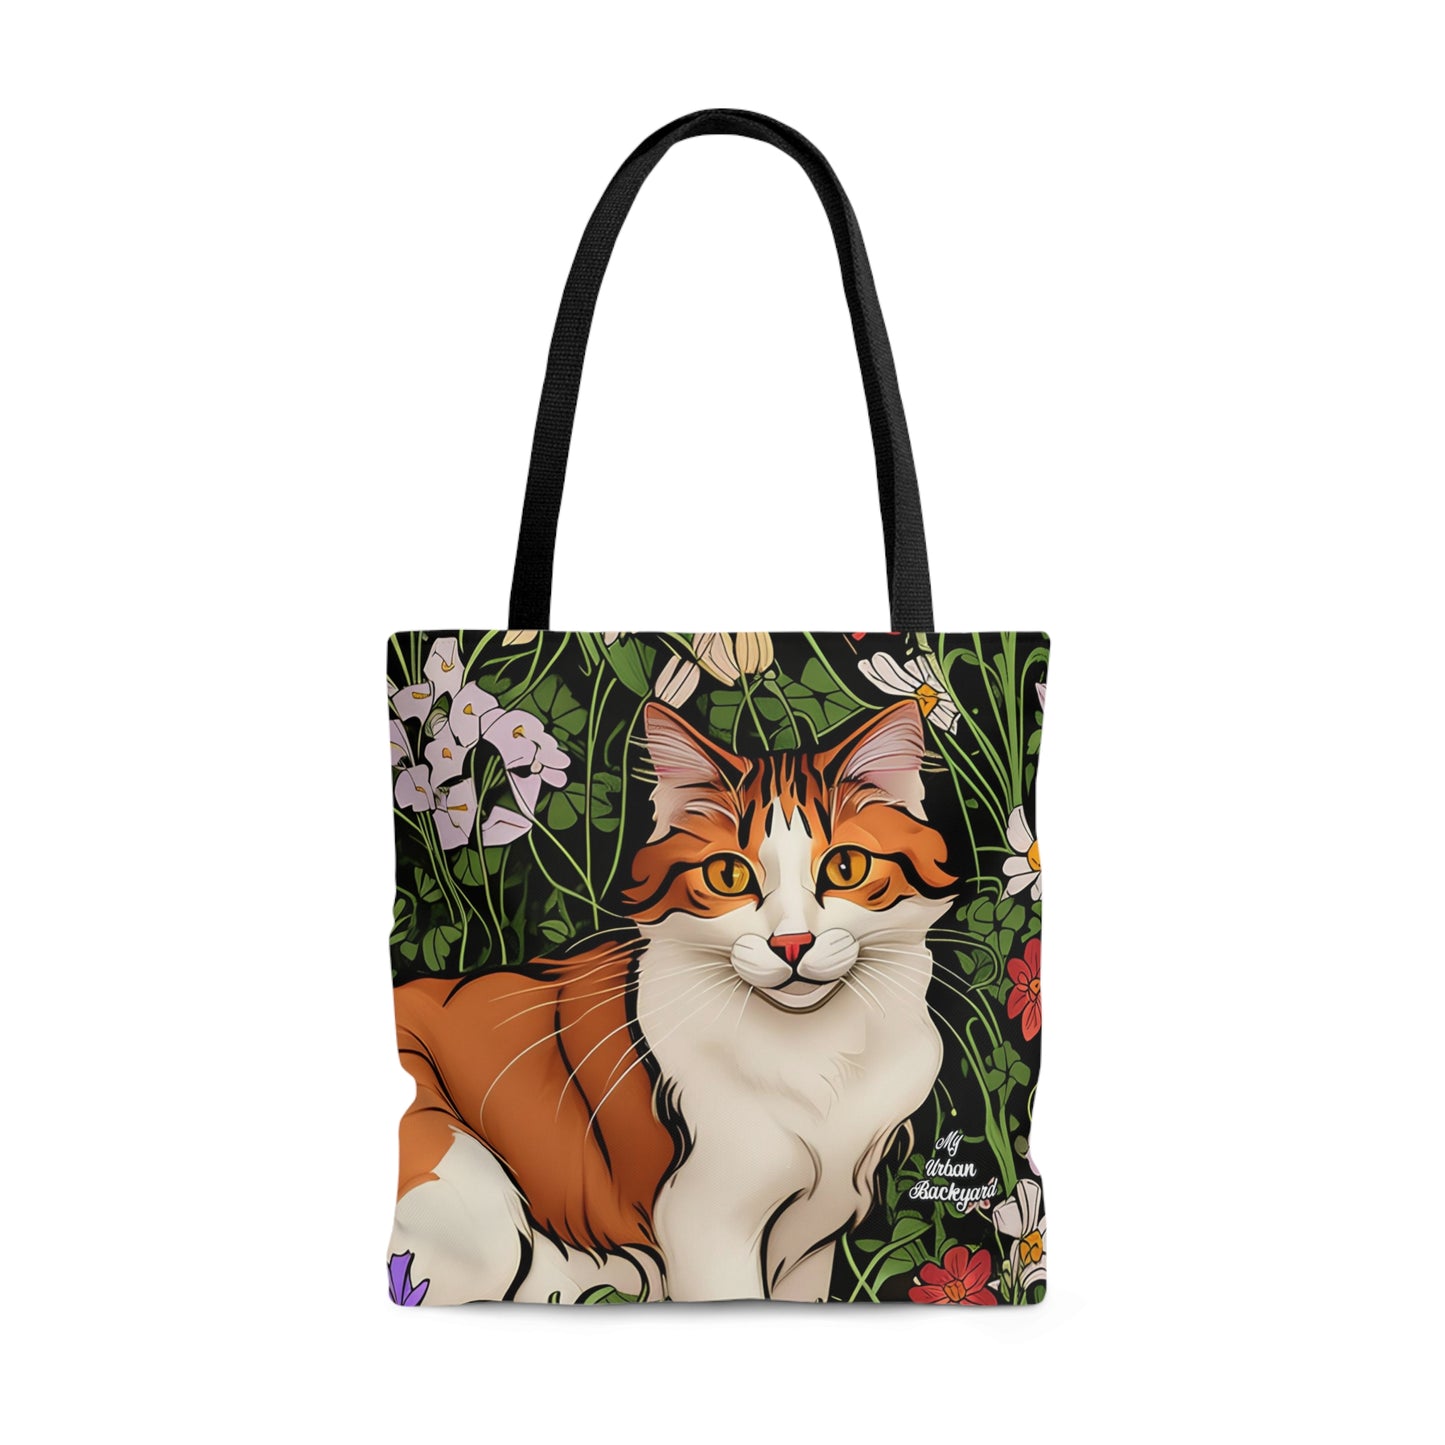 Orange Cat with Flowers, Tote Bag for Everyday Use - Durable and Functional